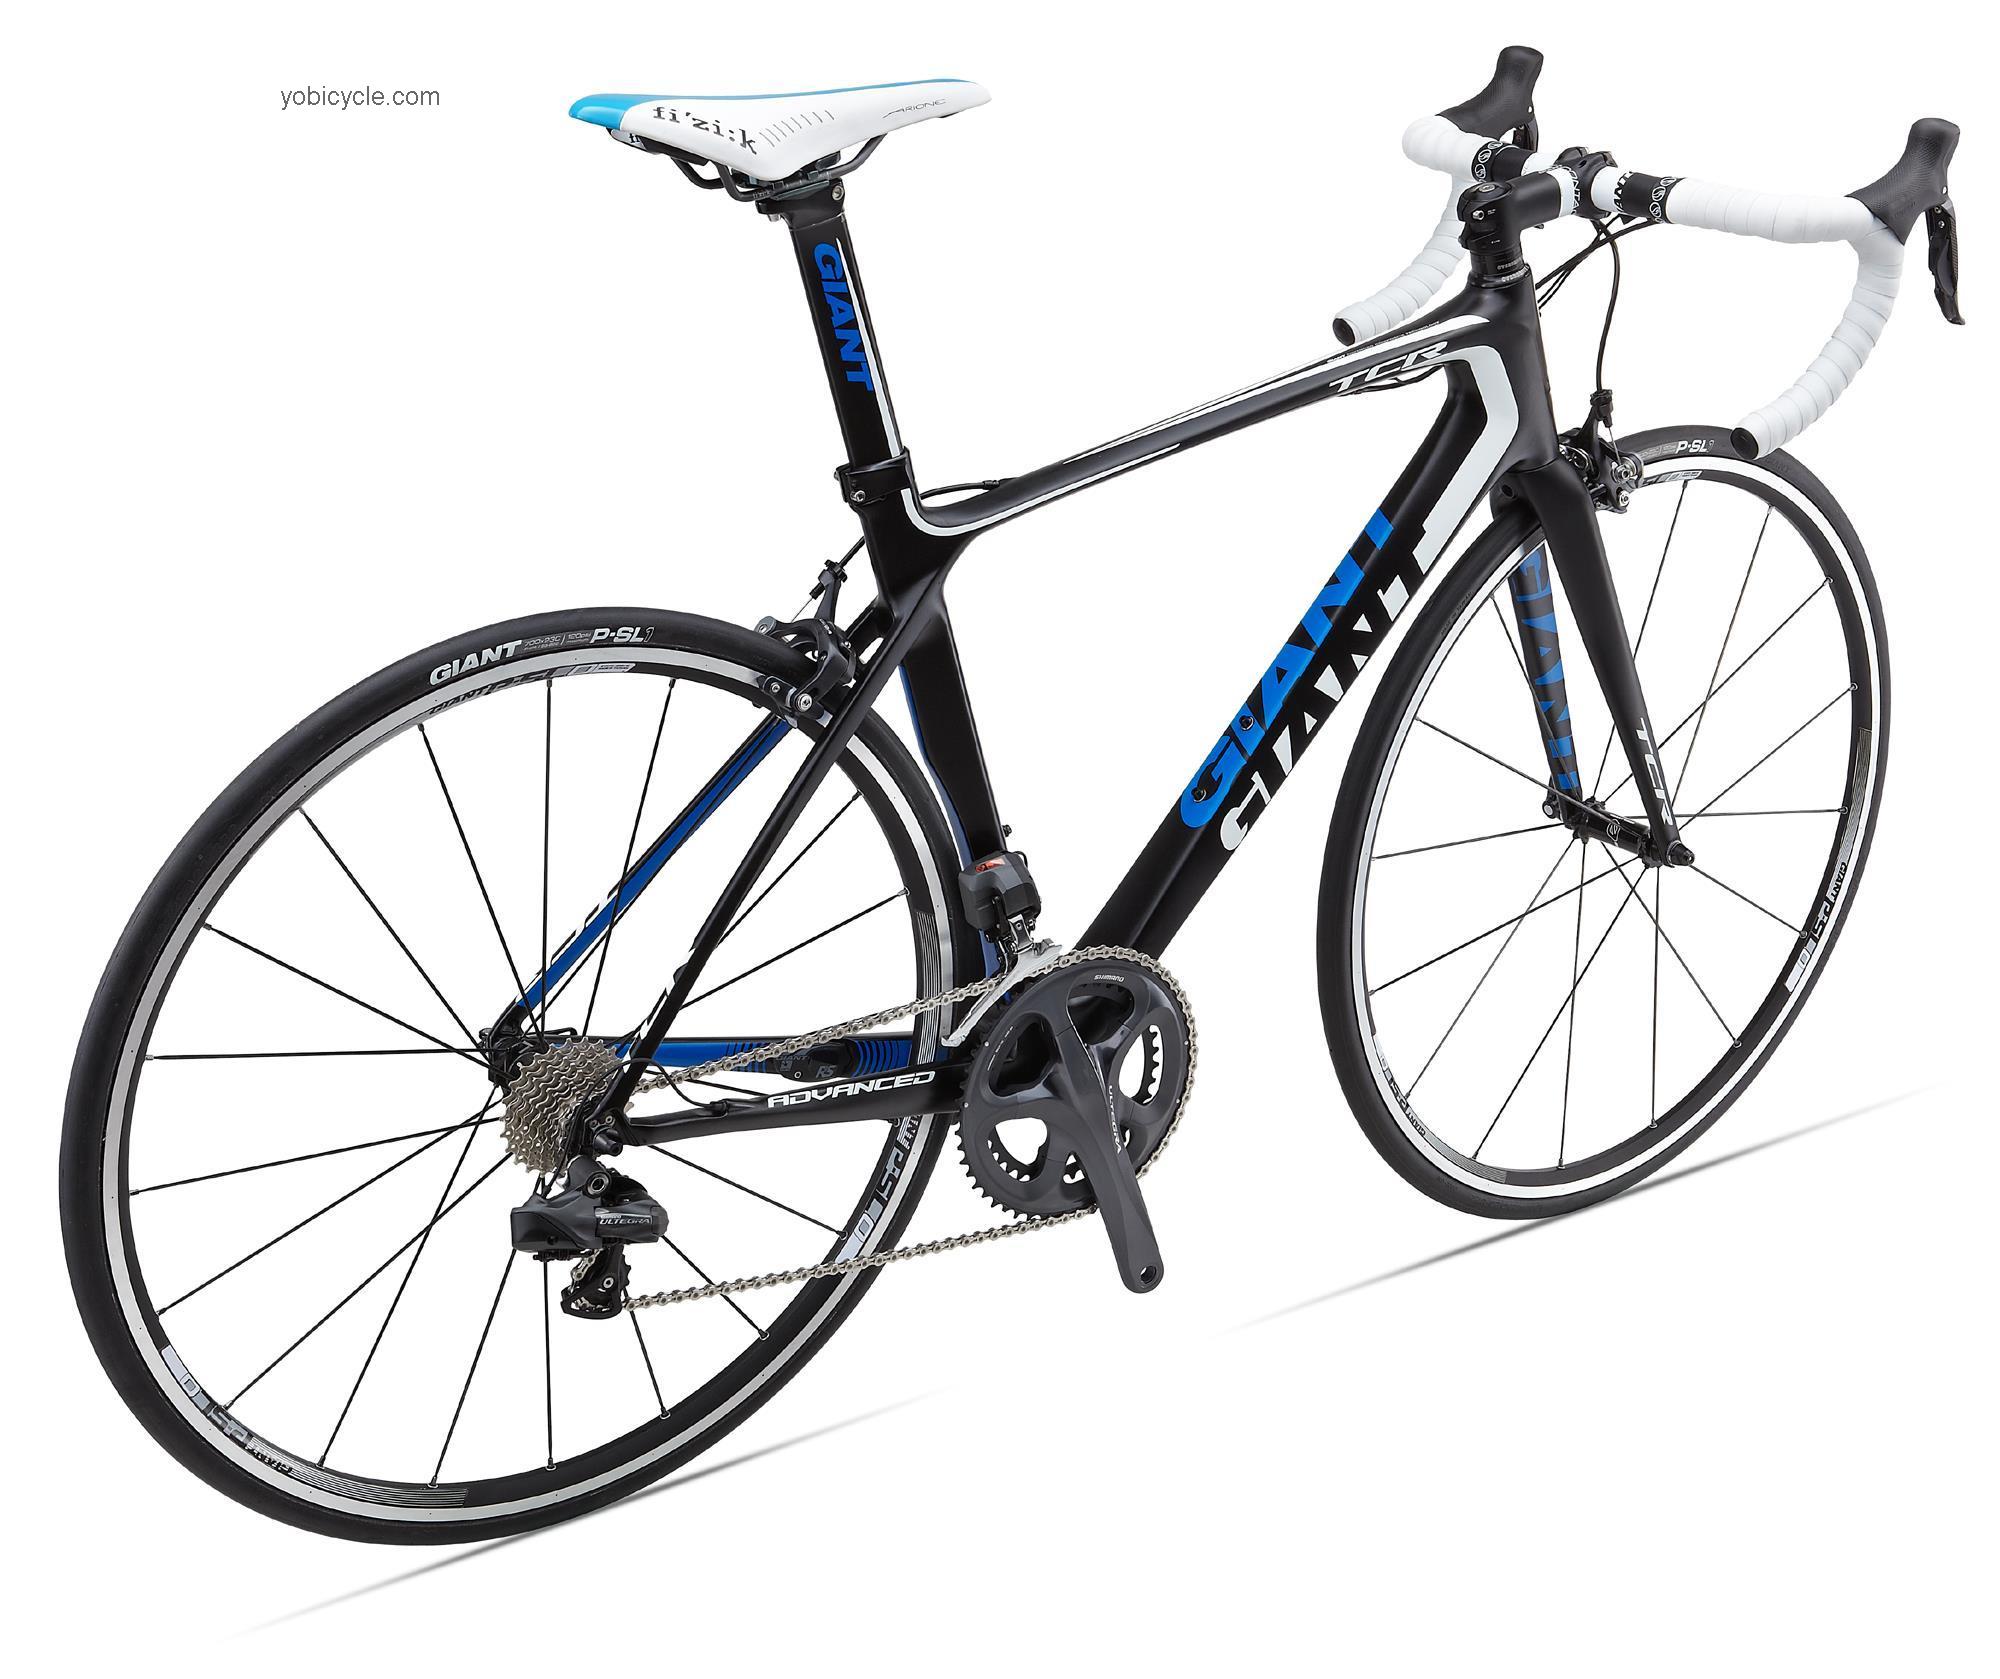 Giant TCR Advanced 0 2013 comparison online with competitors